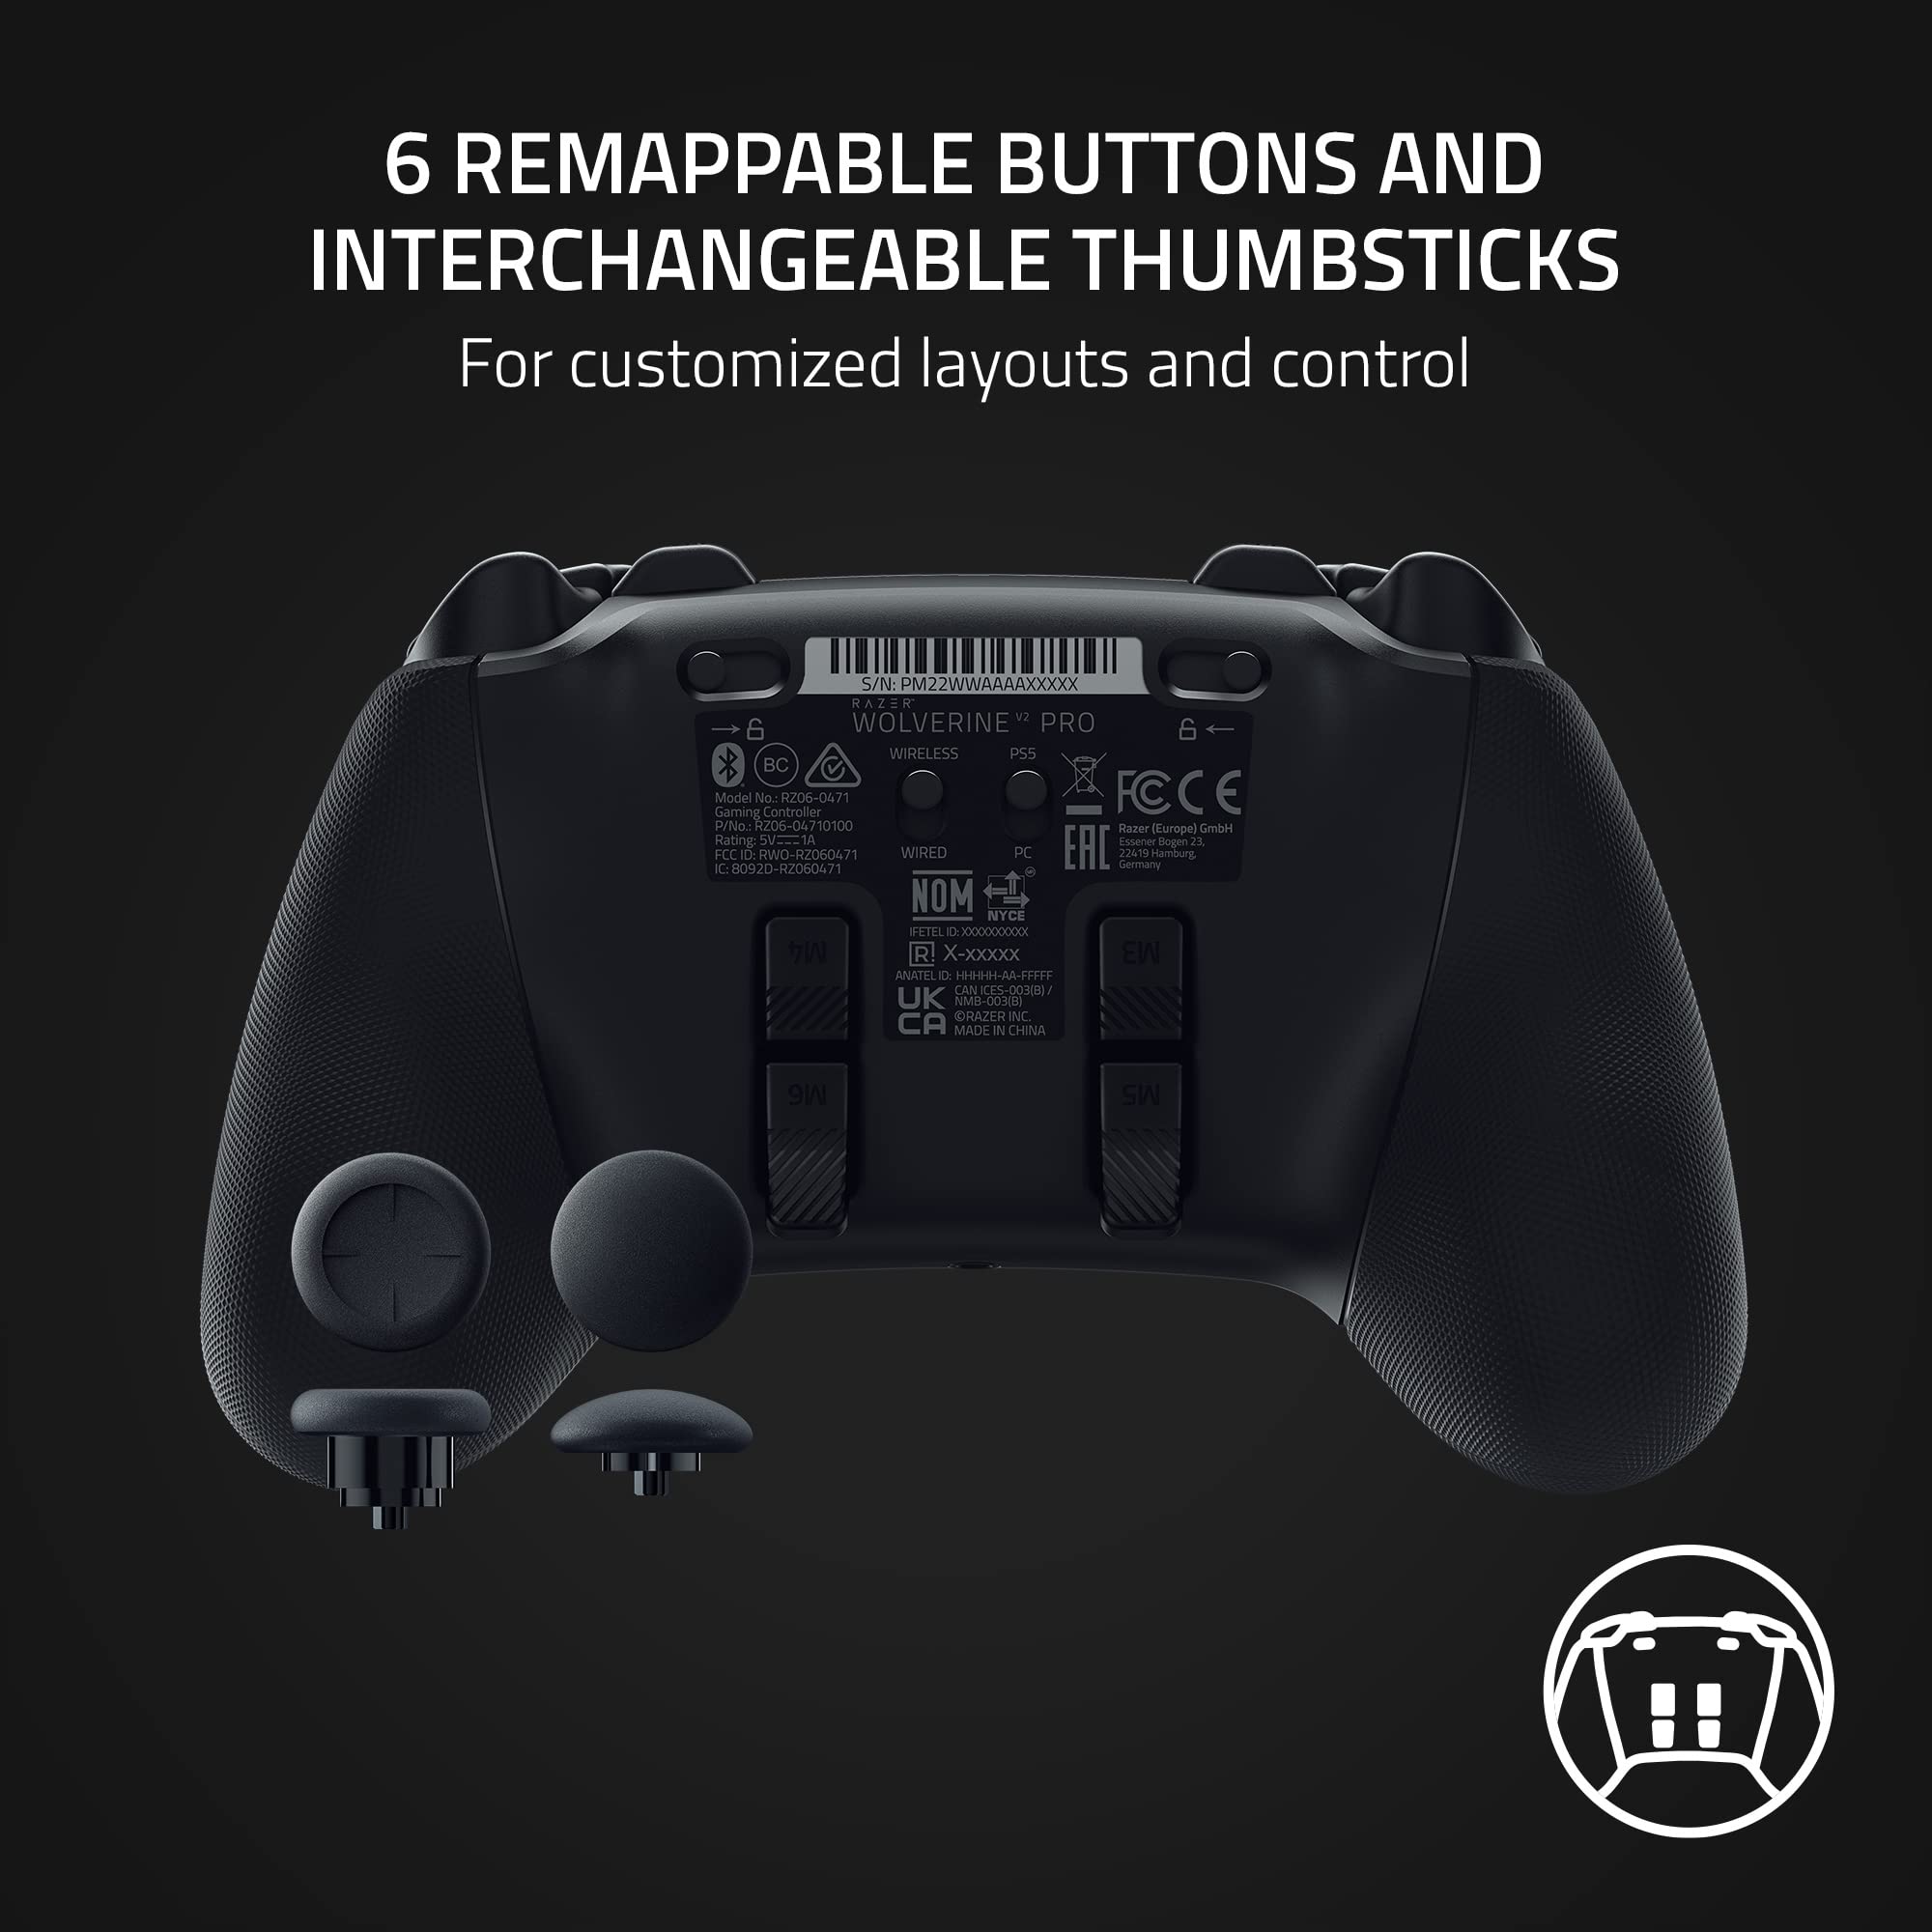 Razer Wolverine V2 Pro Wireless Gaming Controller for PlayStation 5 / PS5, PC: Mecha-Tactile Action Buttons - 8-Way Microswitch D-Pad - HyperTrigger - 6 Remappable Buttons - Chroma RGB   - Black